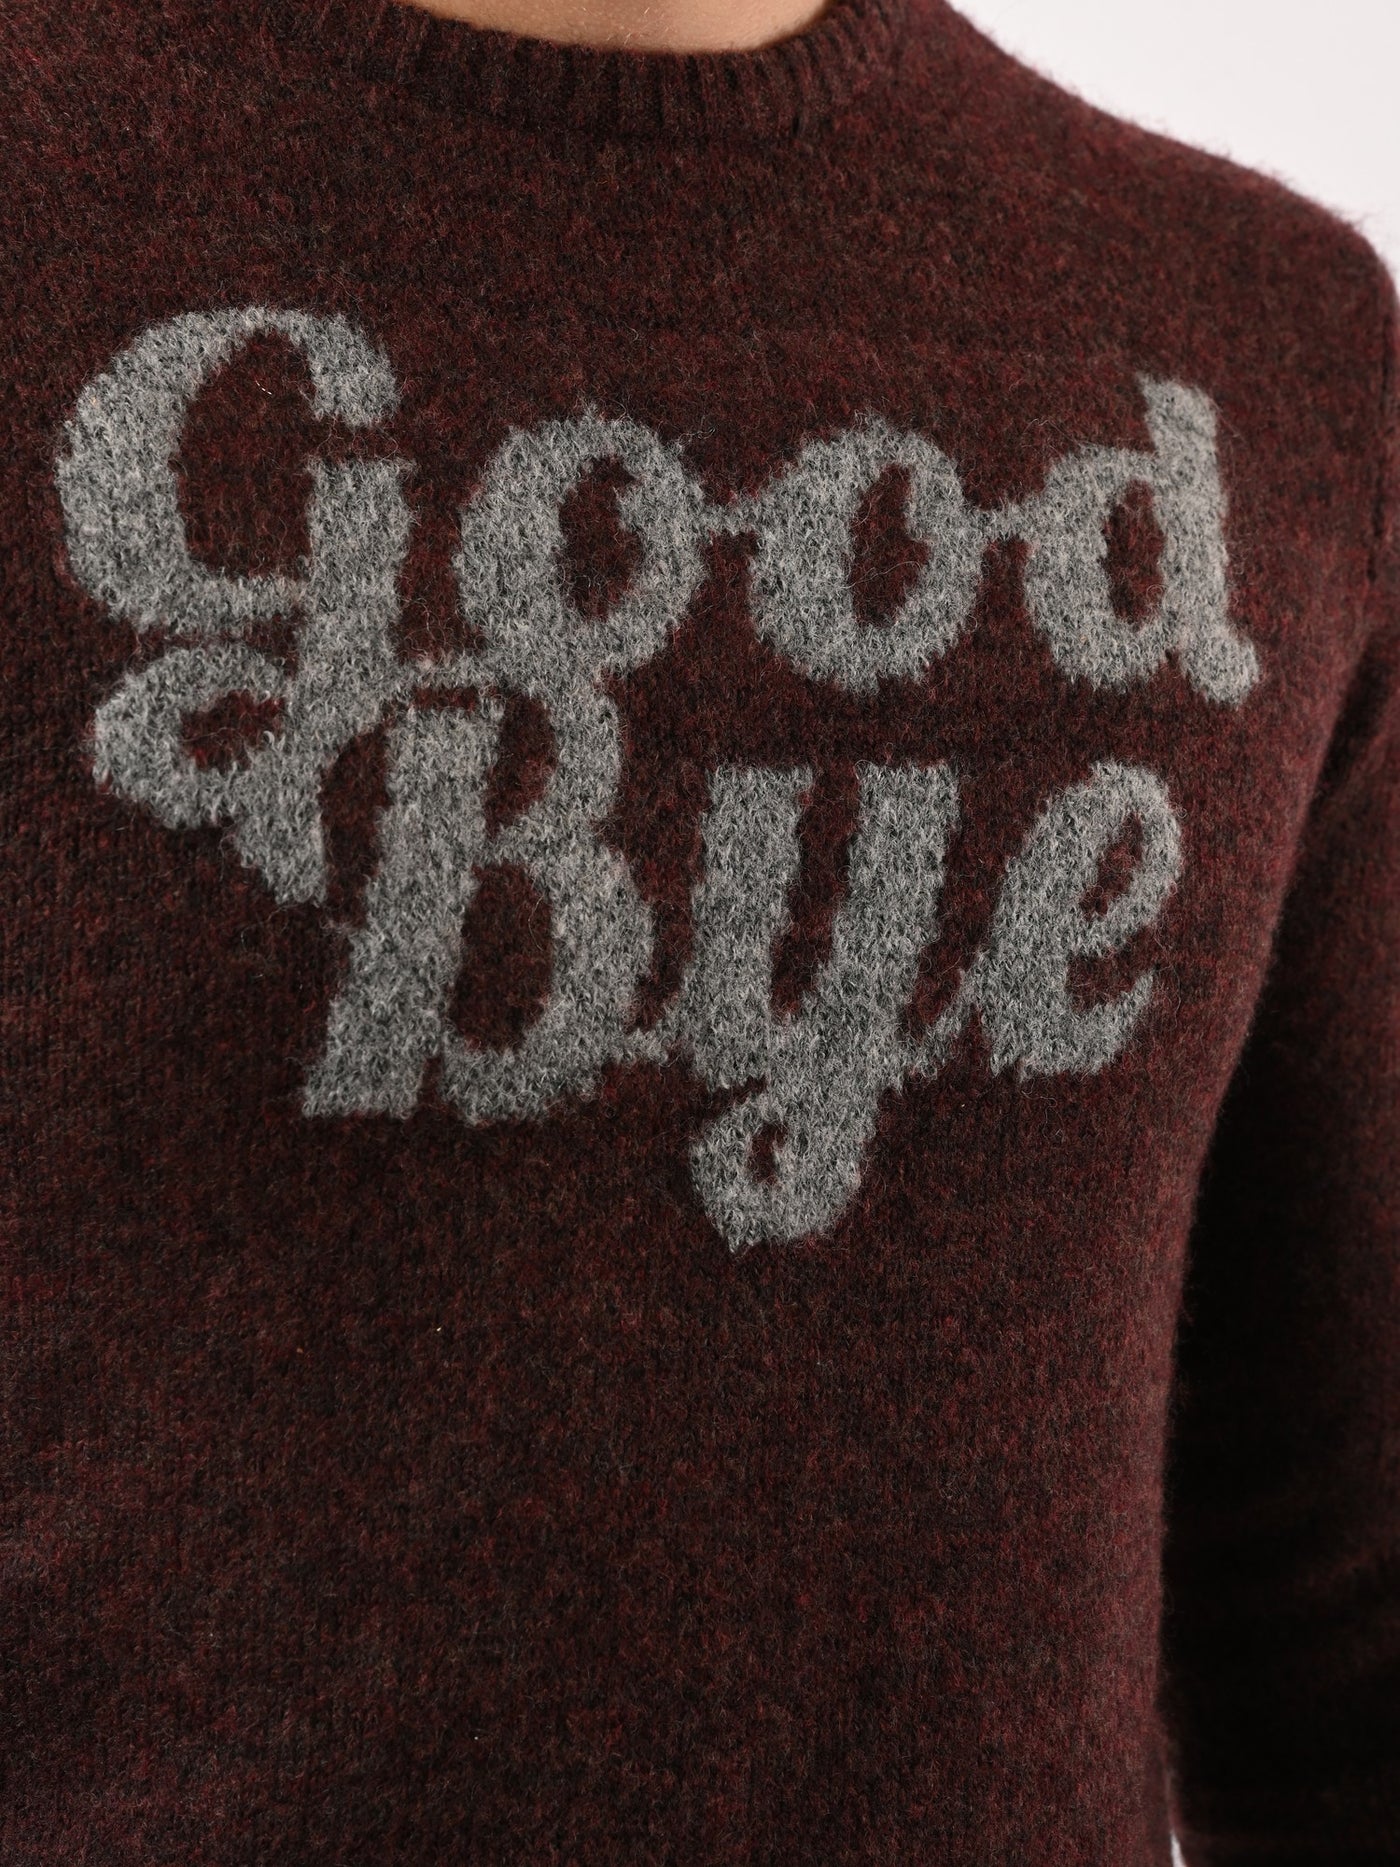 Pullover - "Good Bye" - Comfy